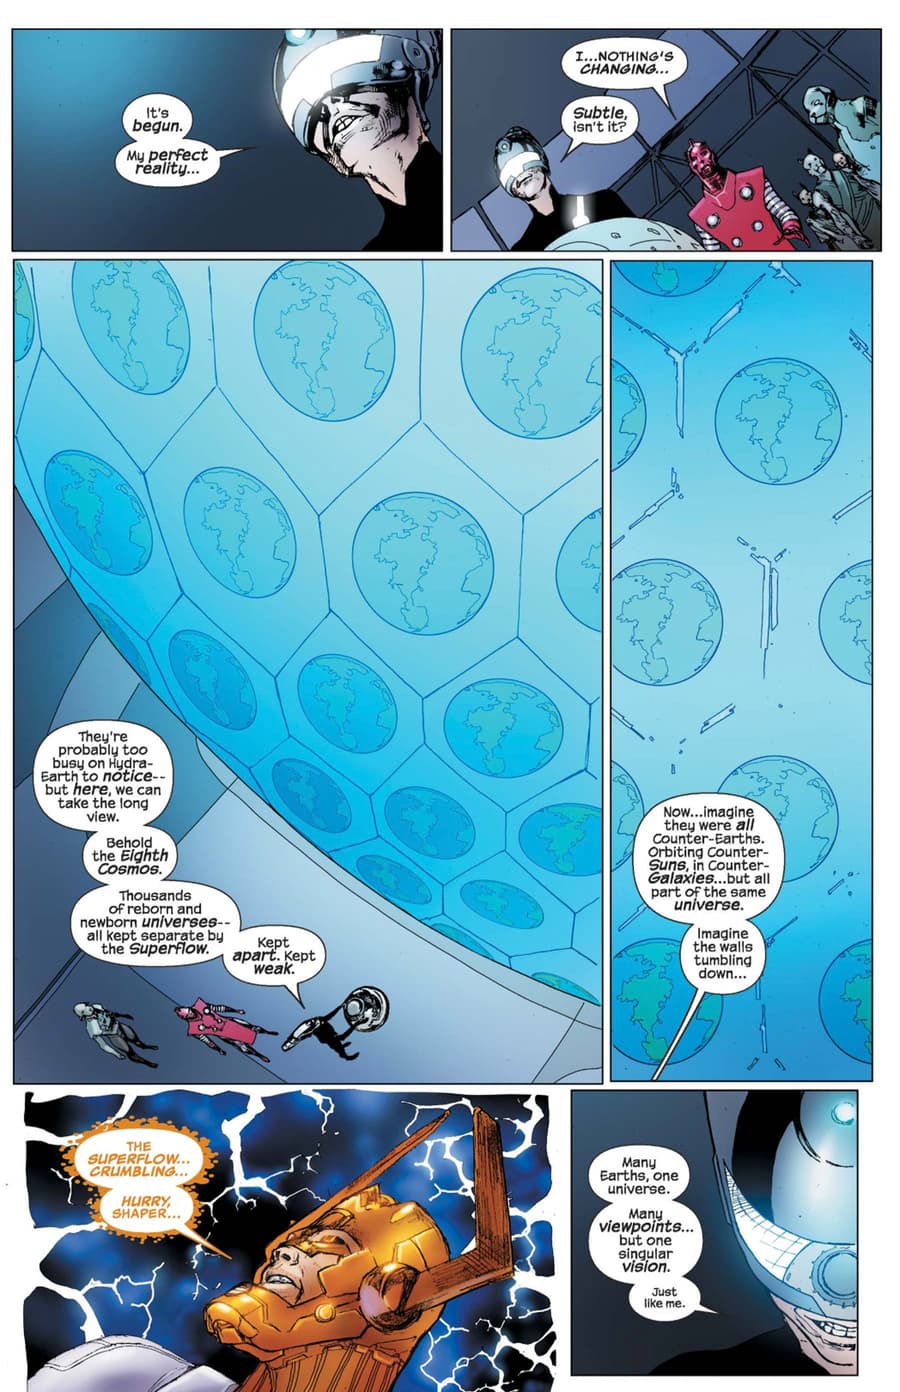 ULTIMATES 2 (2016) #9 page by Al Ewing and Travel Foreman